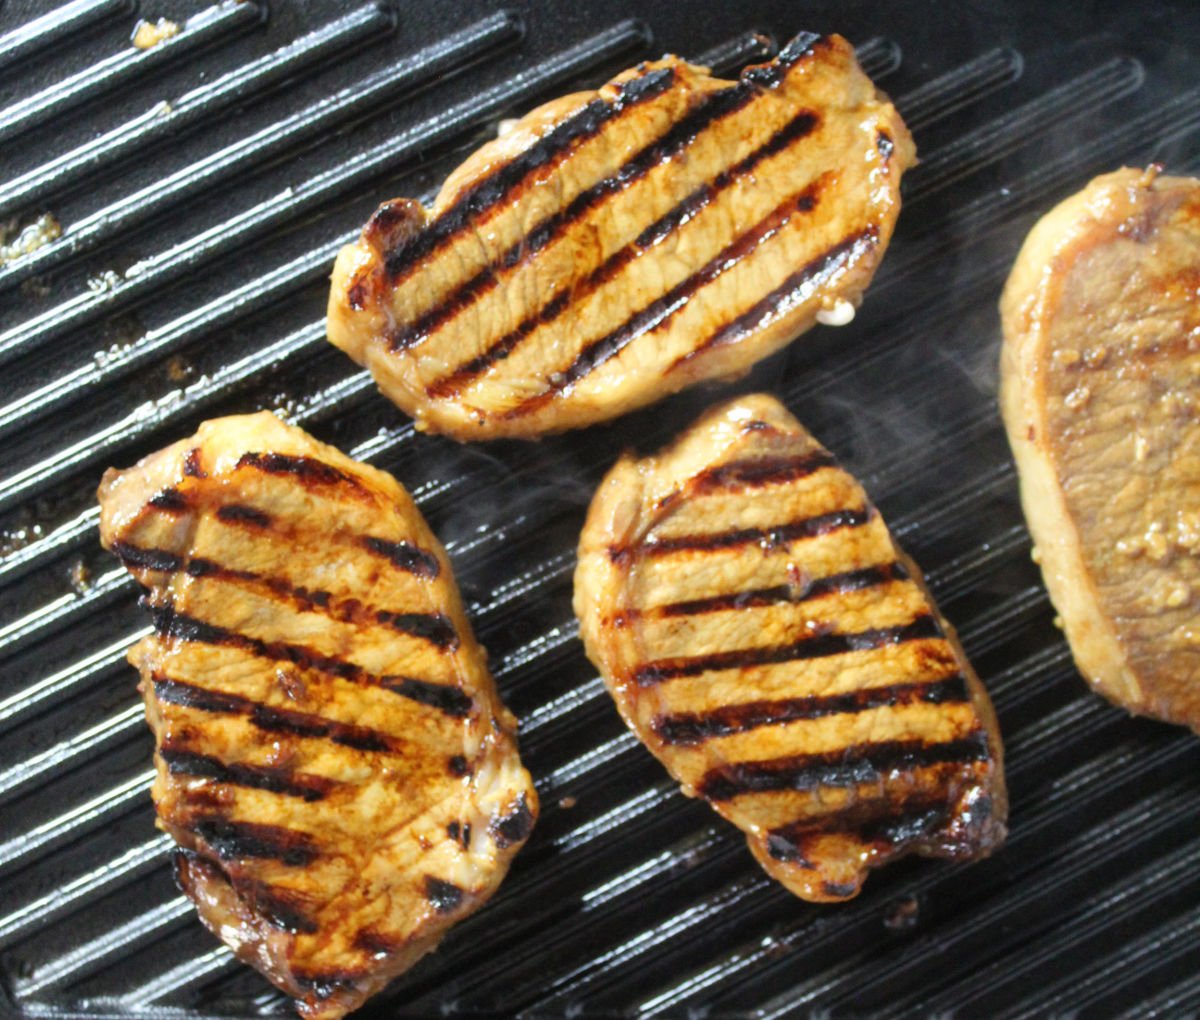 Pork chops being grilled.  Grill marks are seen on three pork chops.